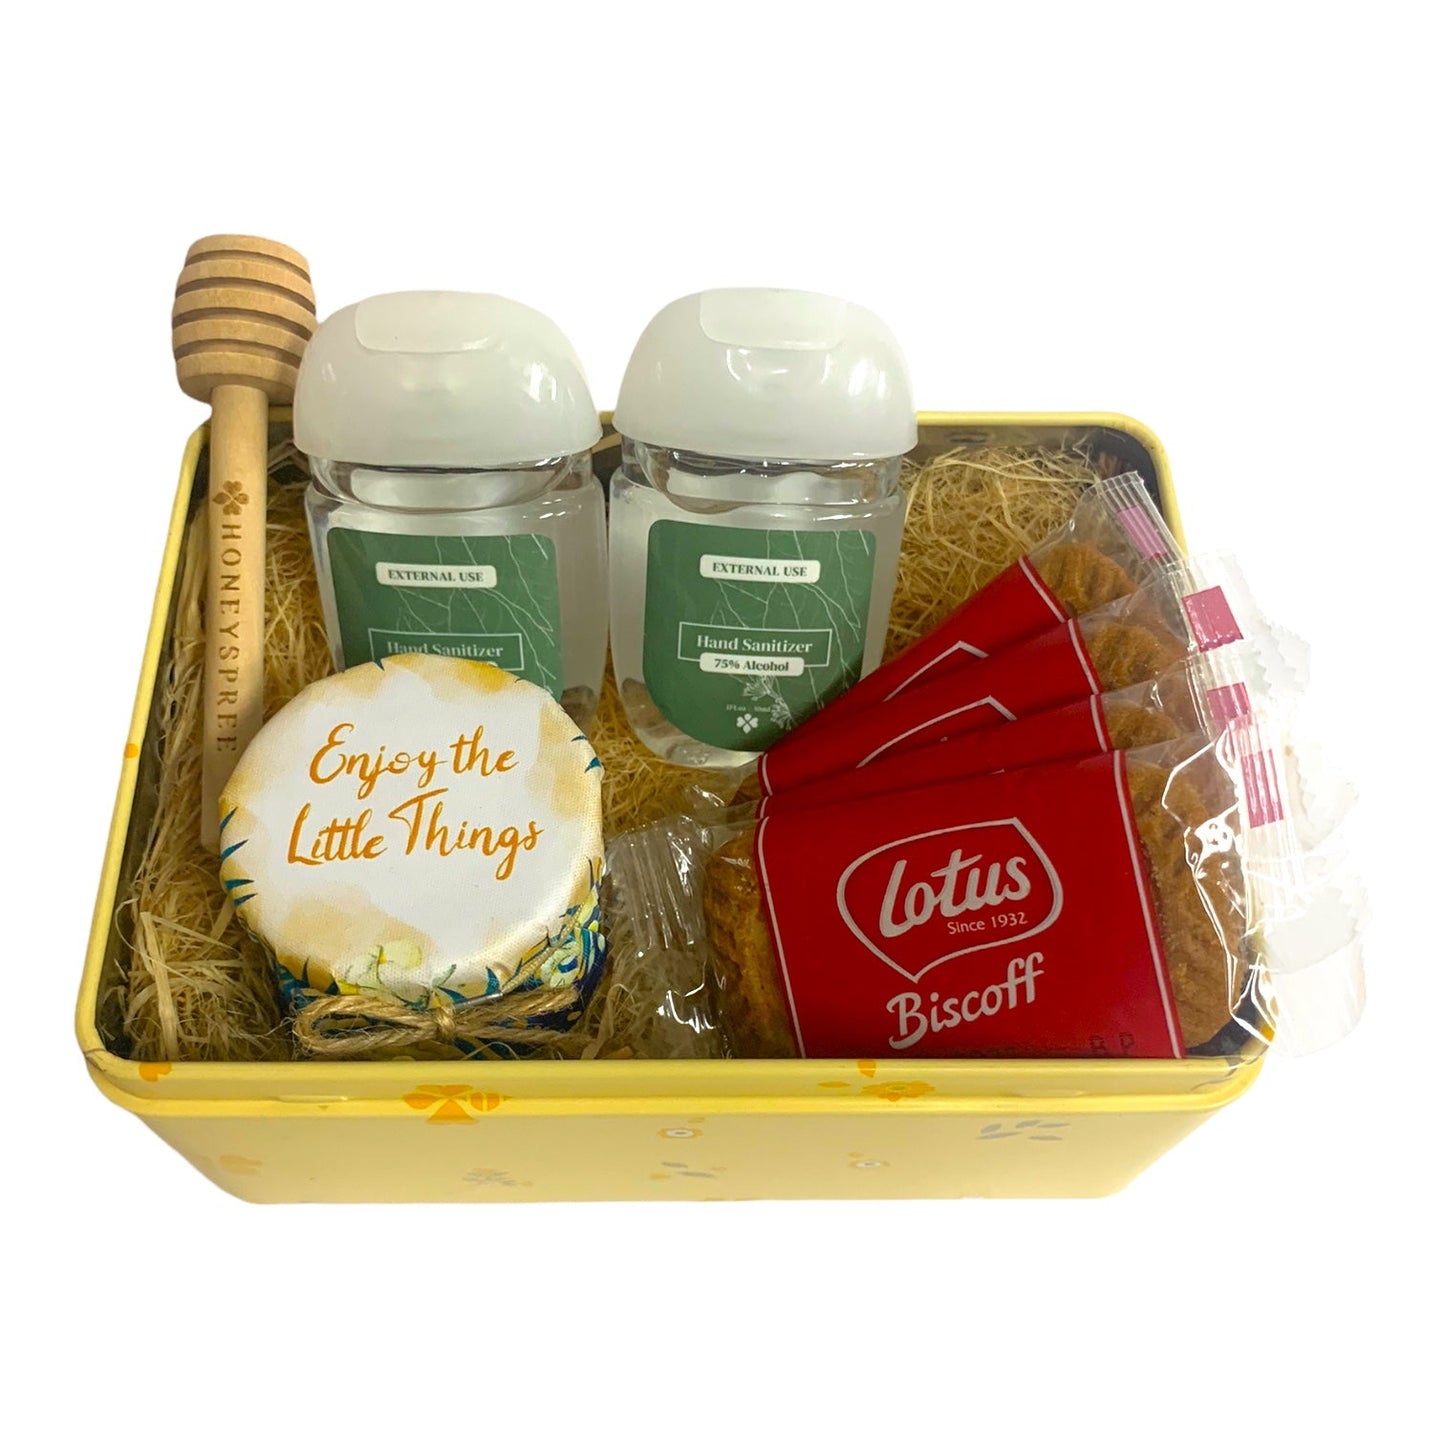 Motivational Honey Gifts - Enjoy the Little Things in Life